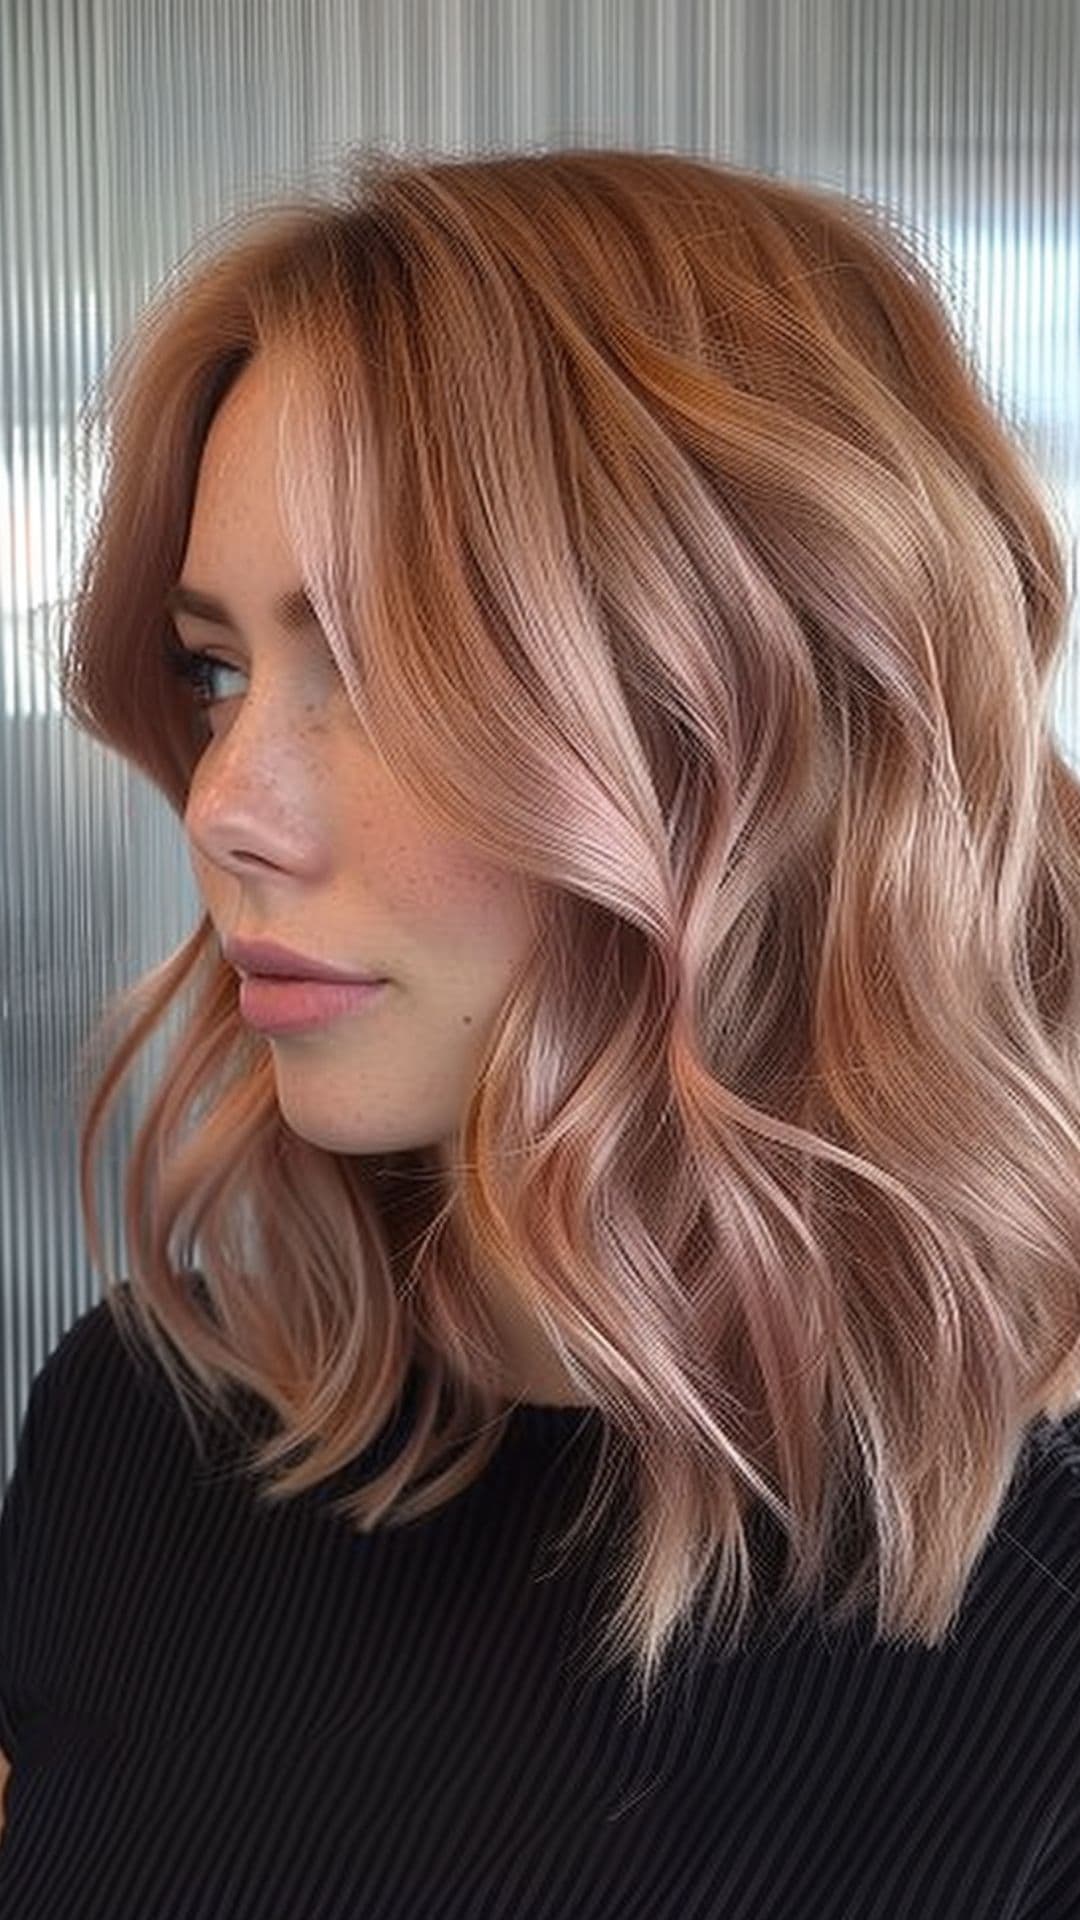 A woman modelling a rose gold hair.